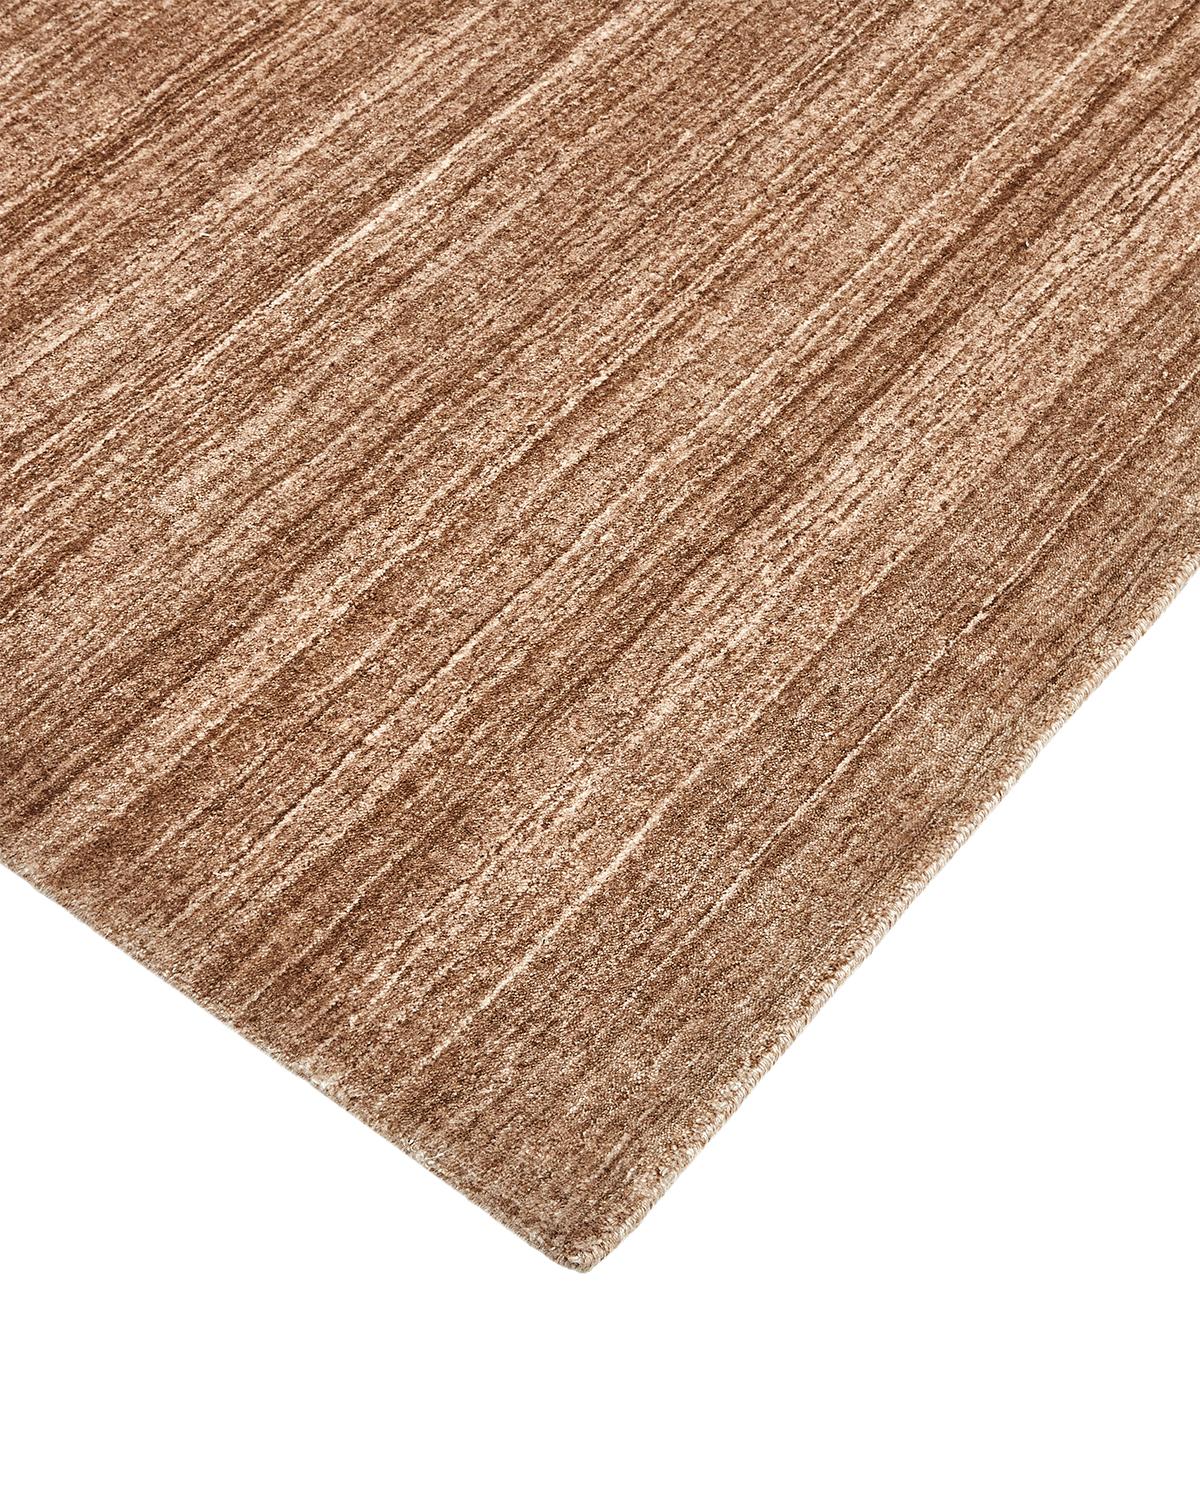 Color: Caramel, made in India. 70% wool, 30% viscose. Subtle tone-on-tone stripes give the Solid collection a depth and sophistication all its own. These rugs can pull the disparate elements of a room into a beautifully cohesive whole; they can also